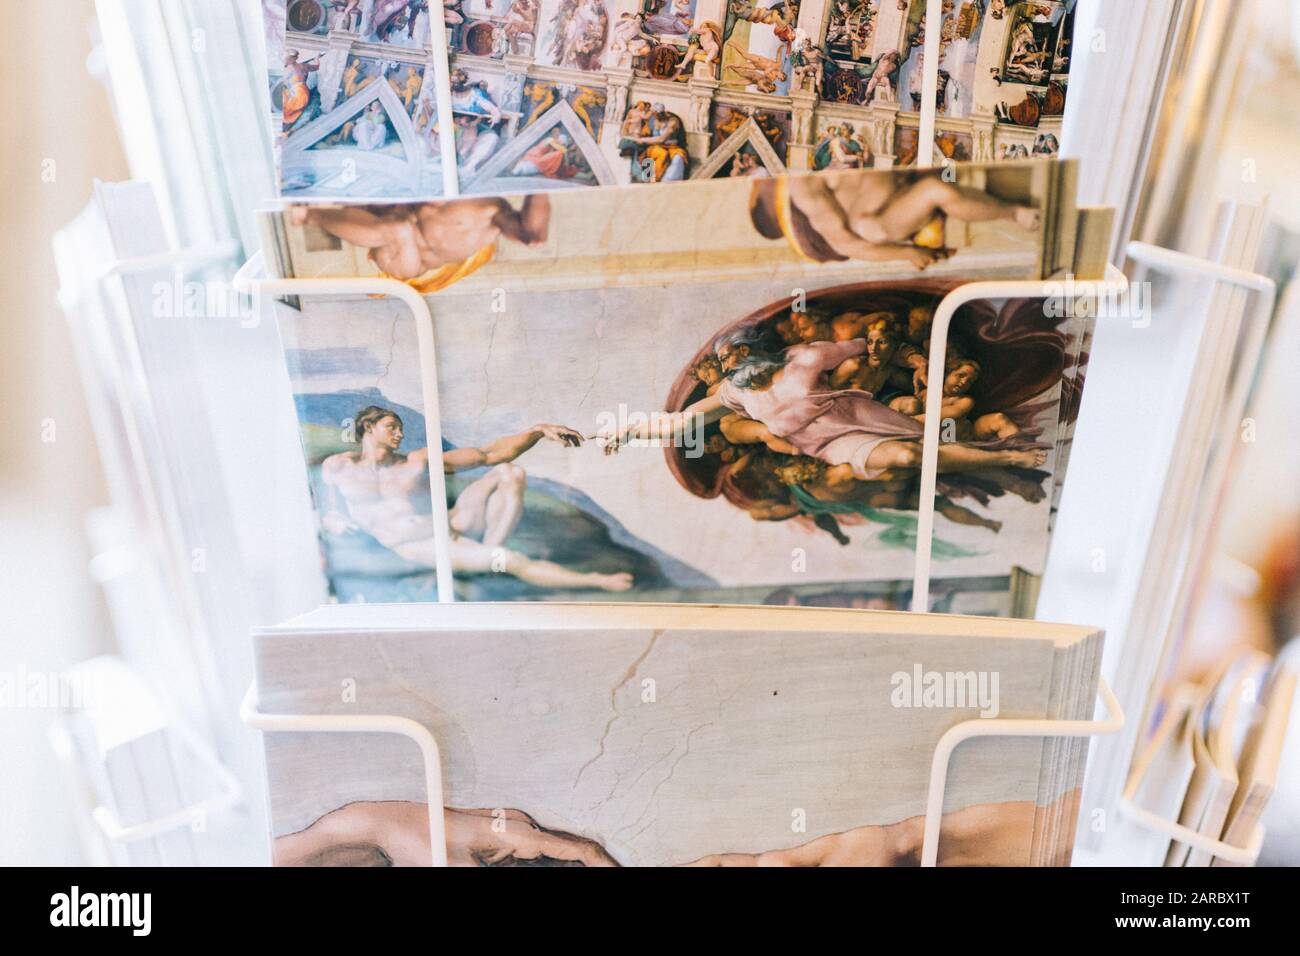 Rome, Italy - Jan 3, 2020: Postcards in a rack in a girft shop inside the Vatican Museum. Stock Photo